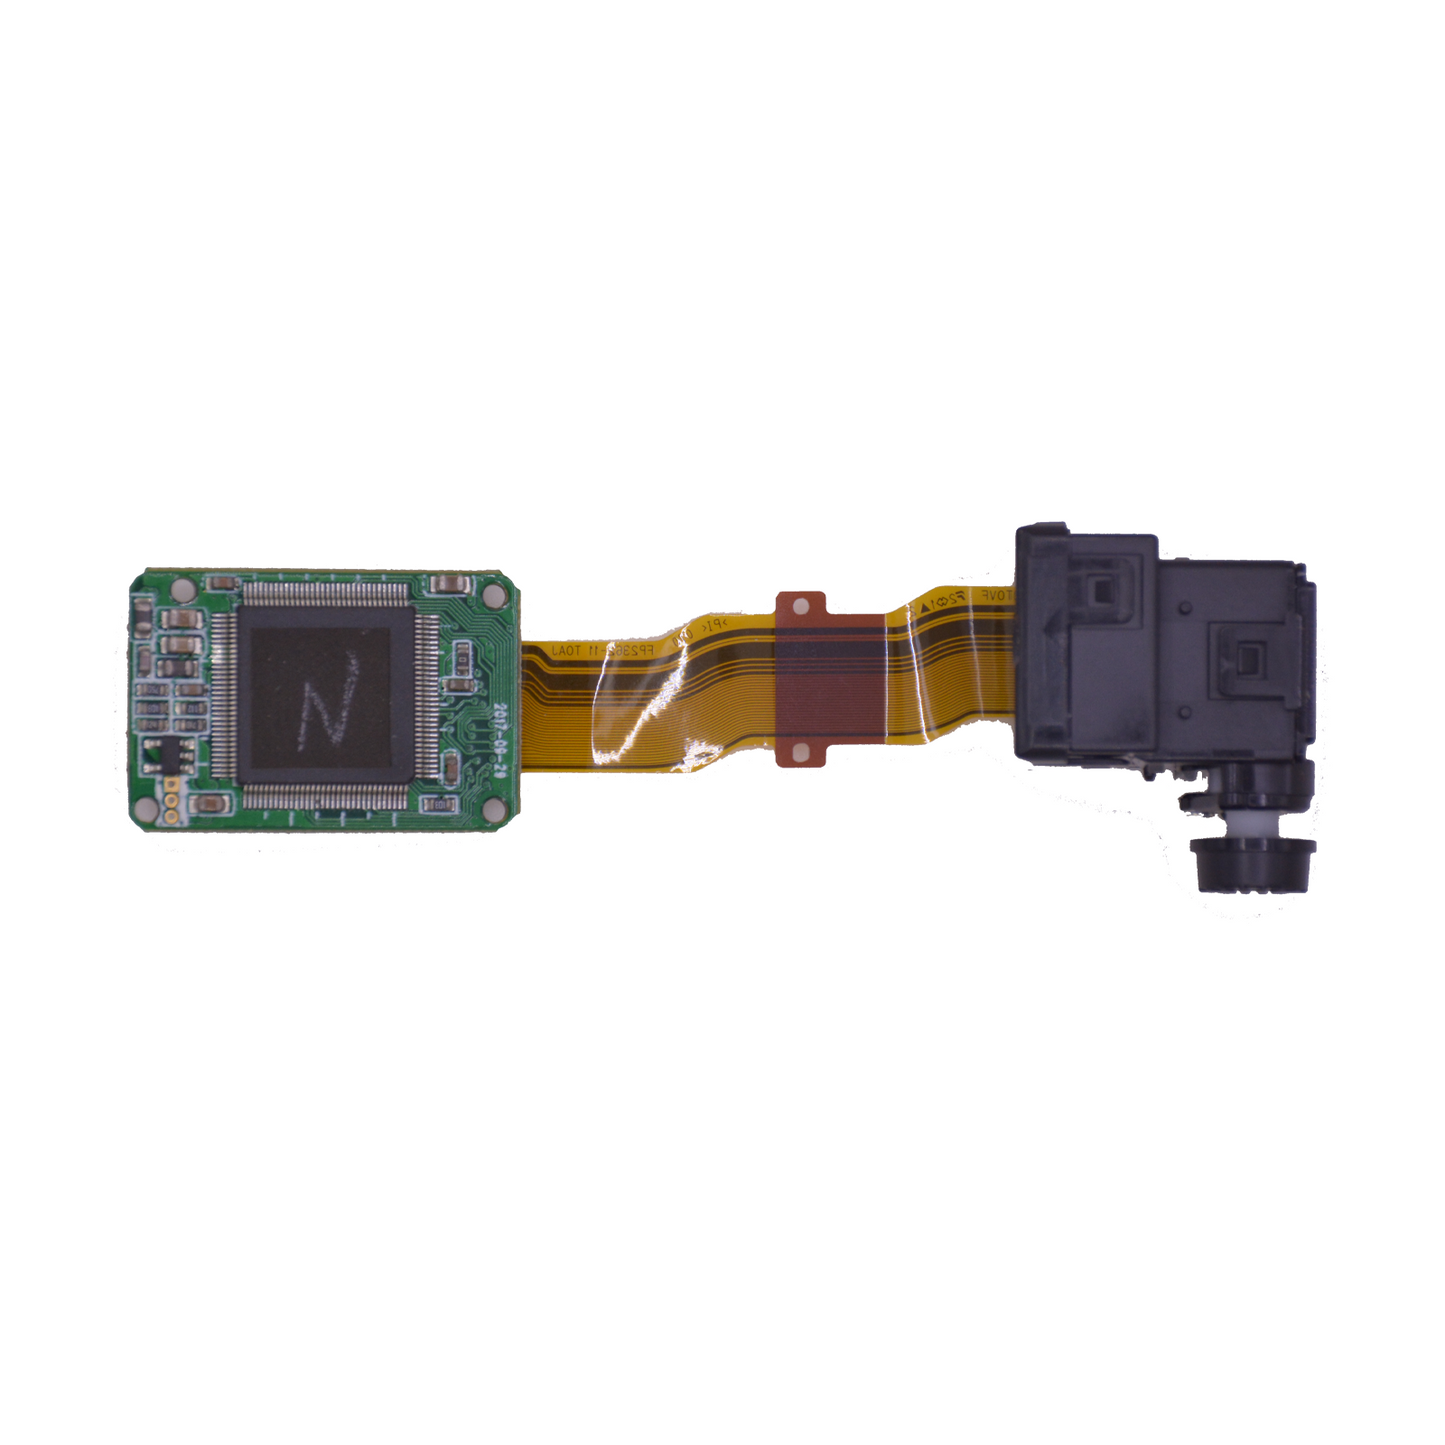 Electrical Viewfinder with A Full Color Ferroelectric LCD Module